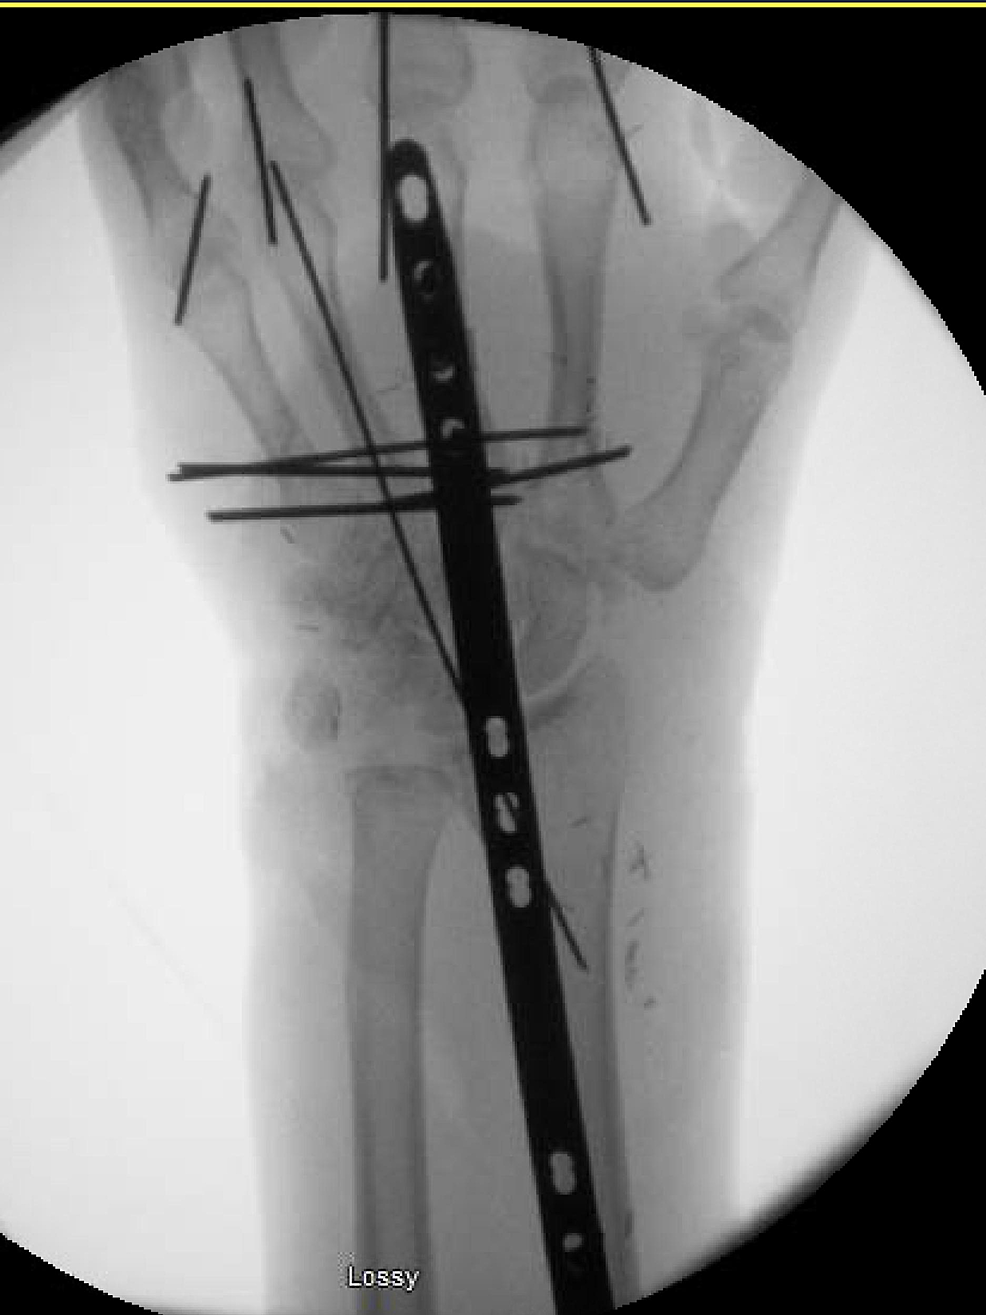 -X-ray-showing-stabilization-of-the-metacarpal-fractures-with-K-wires-and-a-spanning-wrist-plate-placed-to-stabilize-the-wrist.